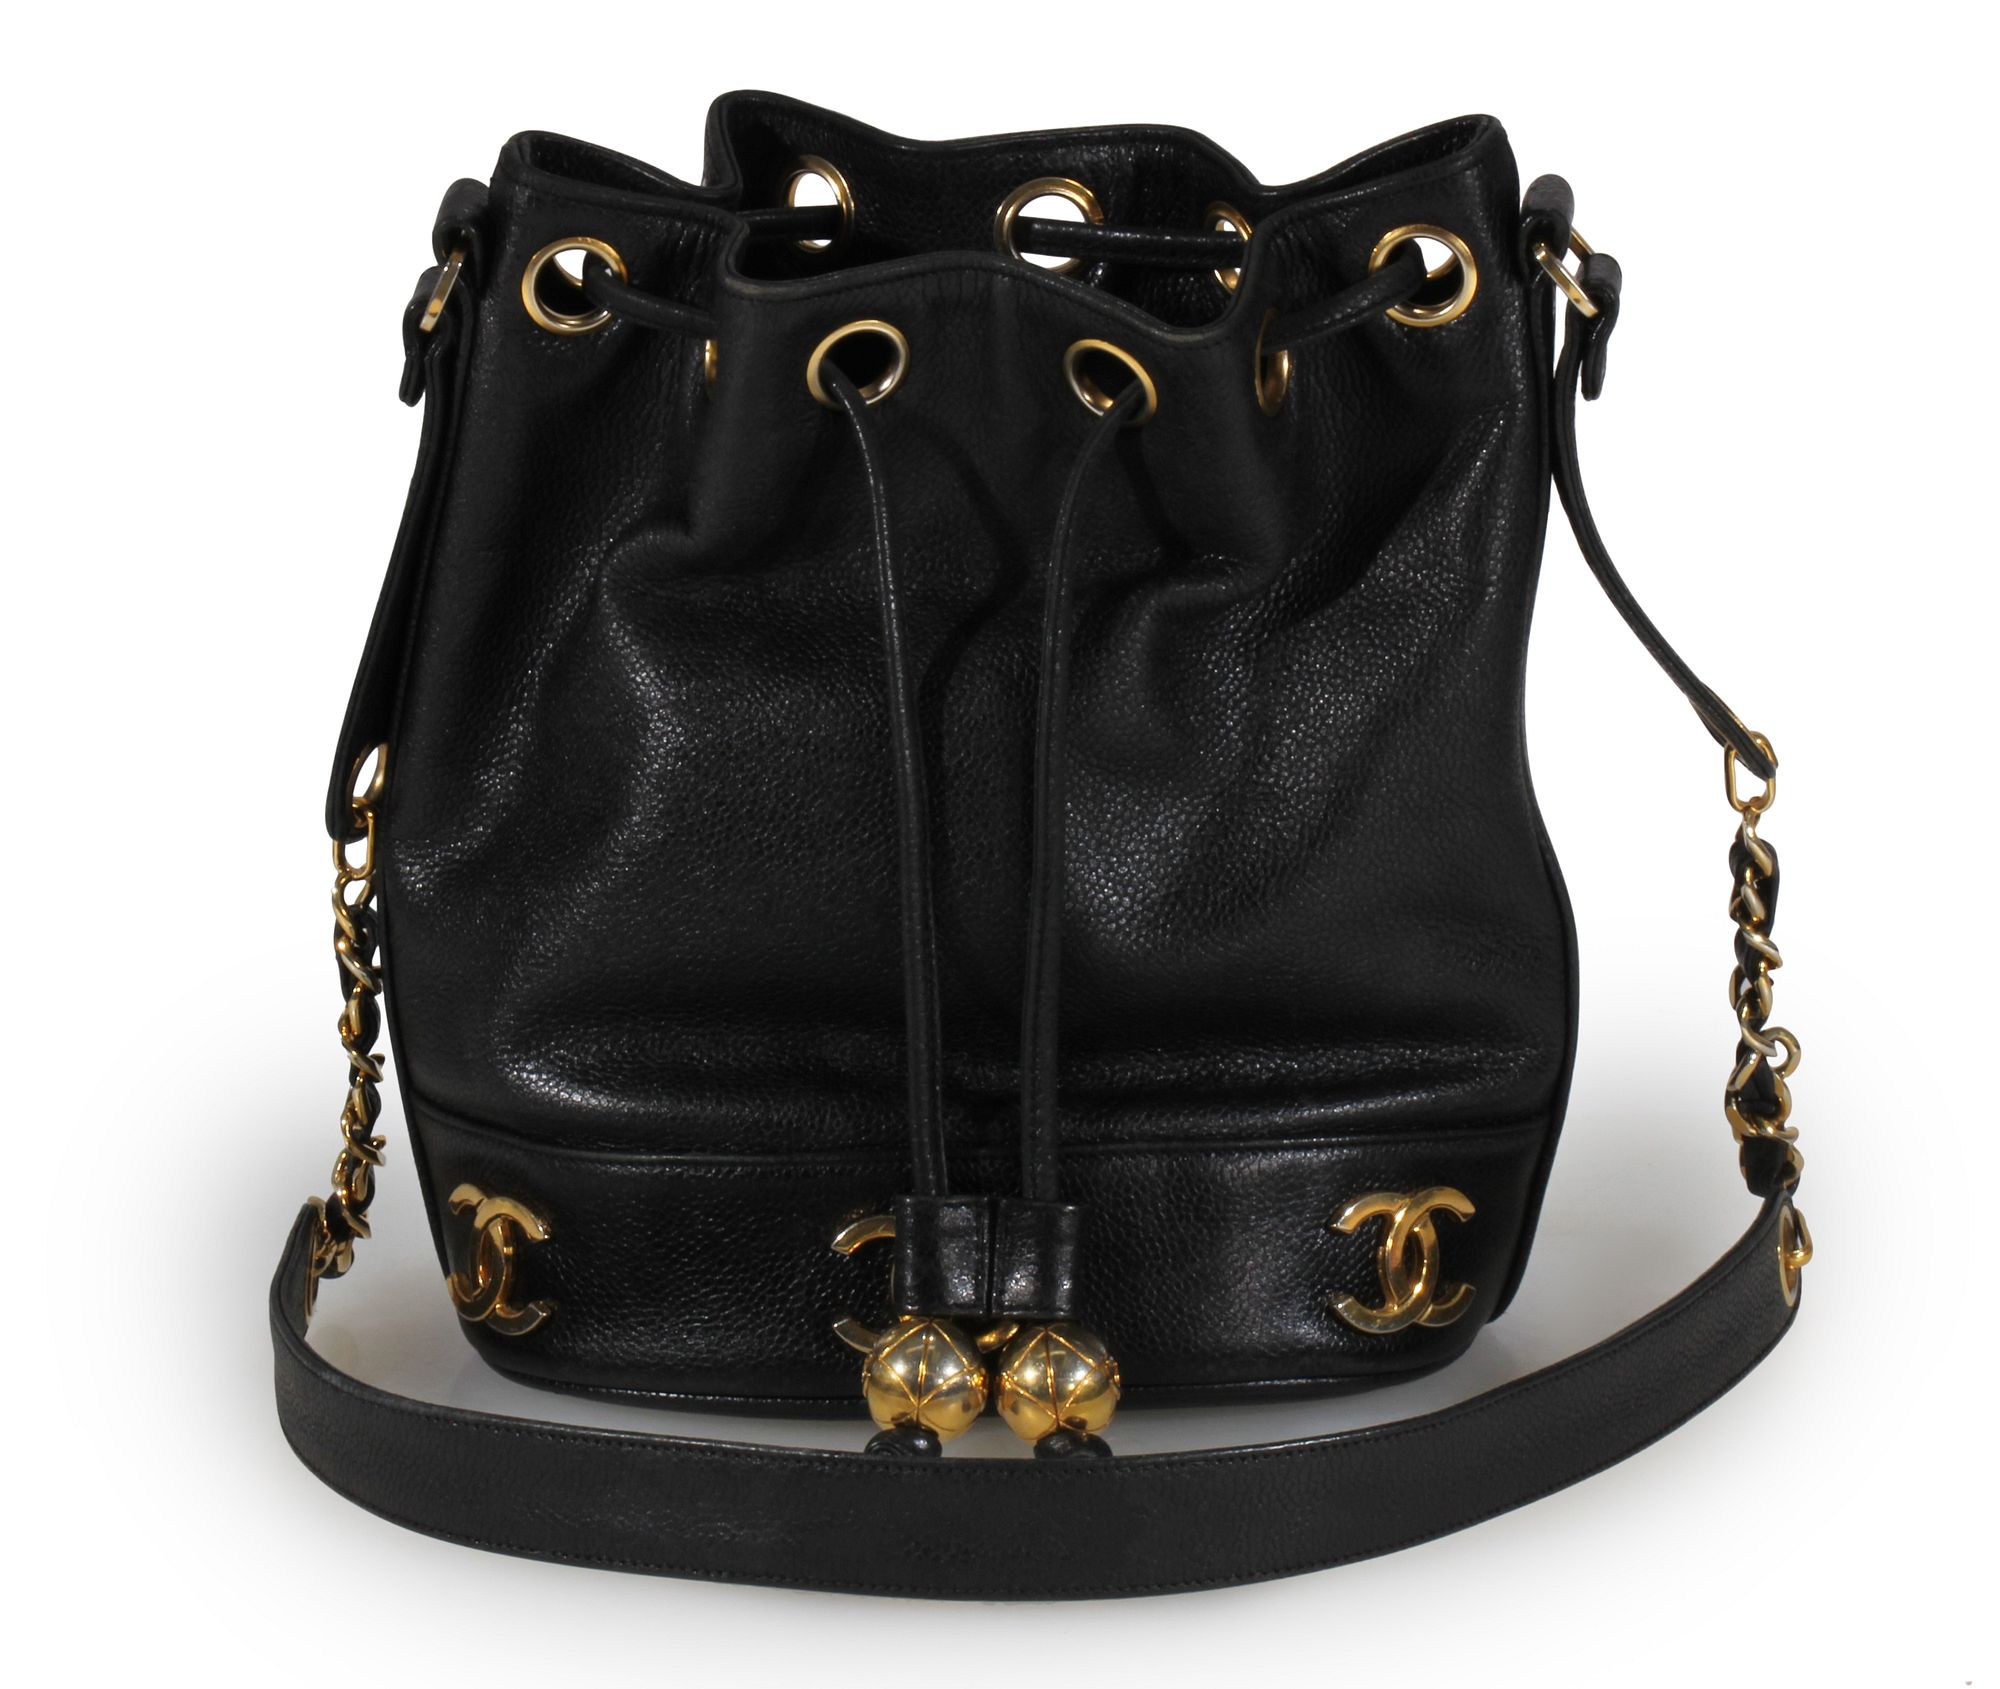 Chanel Bucket Bag, 1990s sold at auction on 16th June